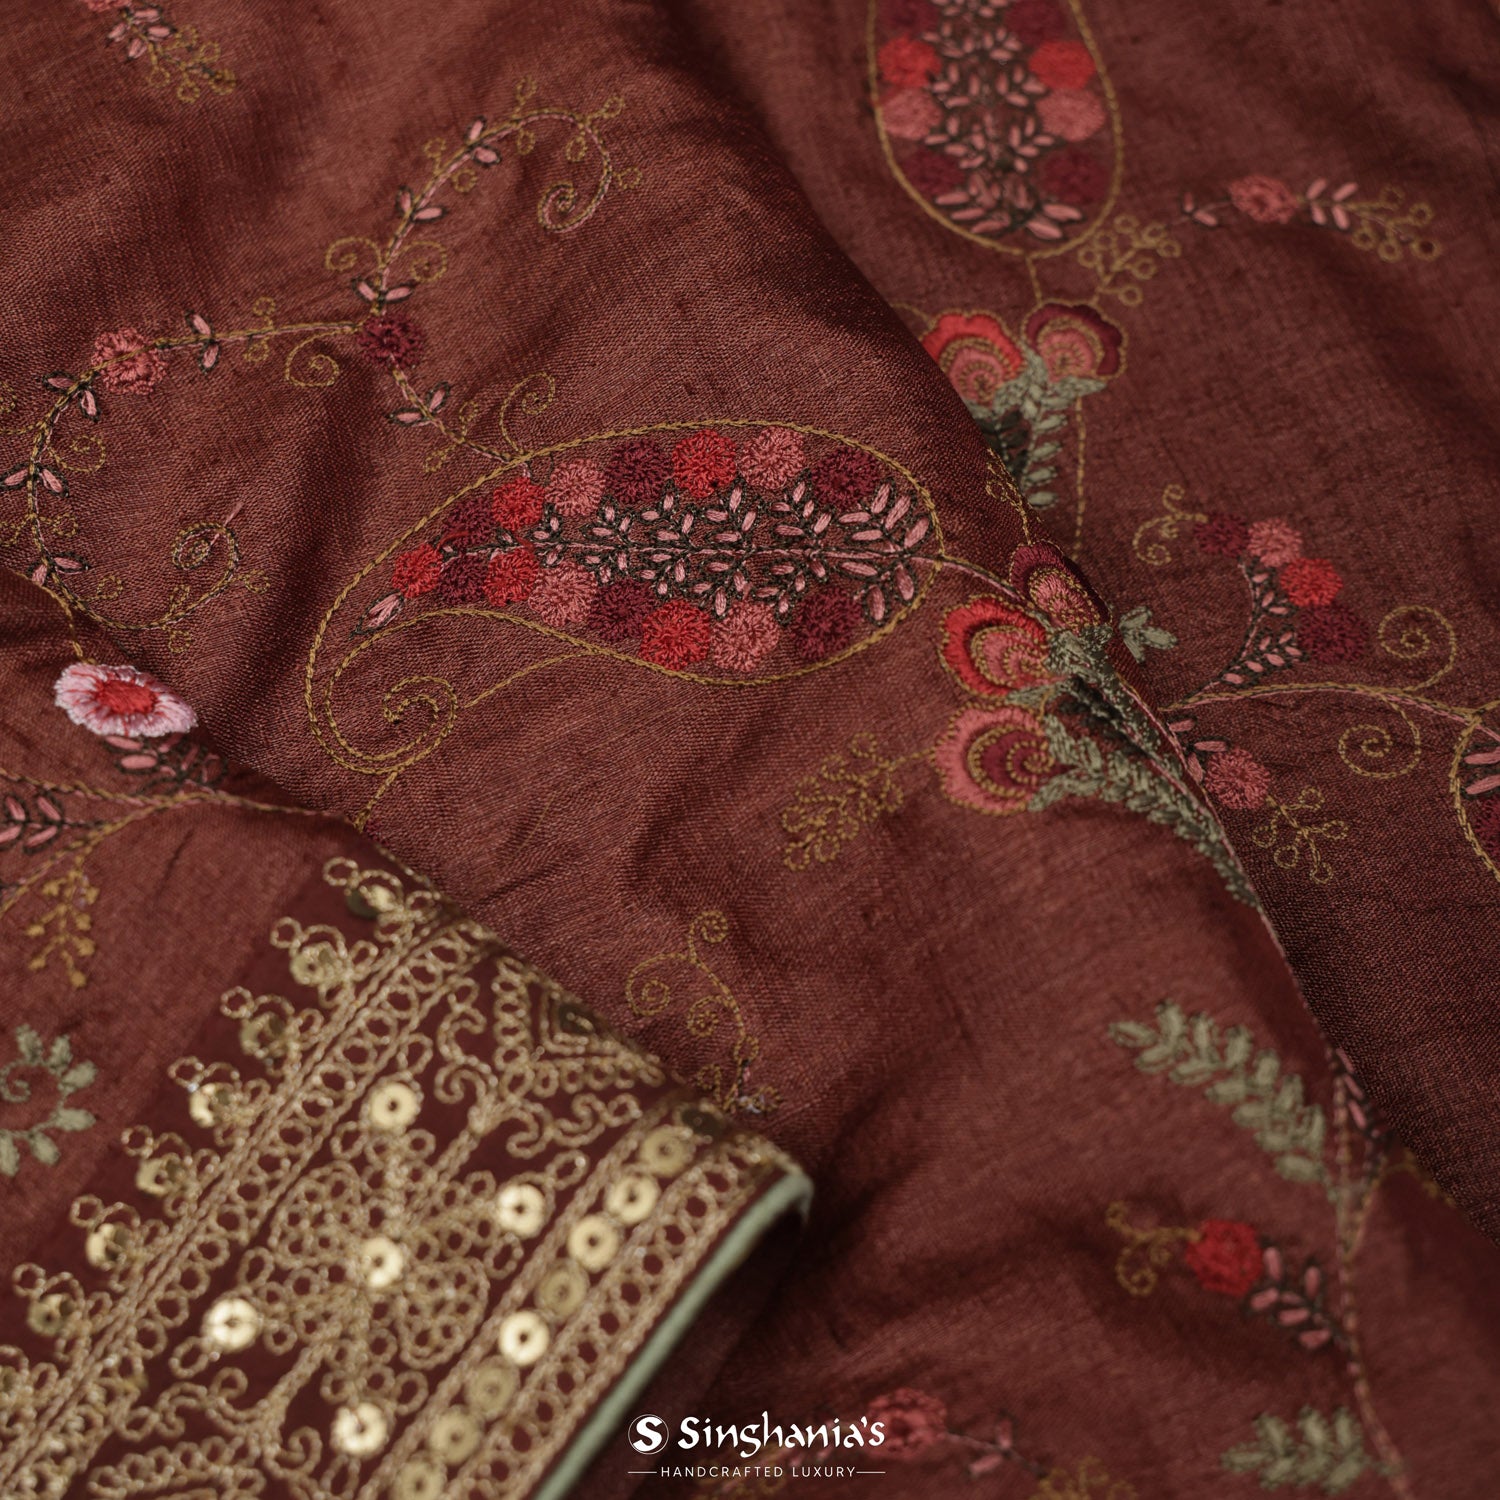 Burnt Henna Brown Tussar Saree With Floral Embroidery